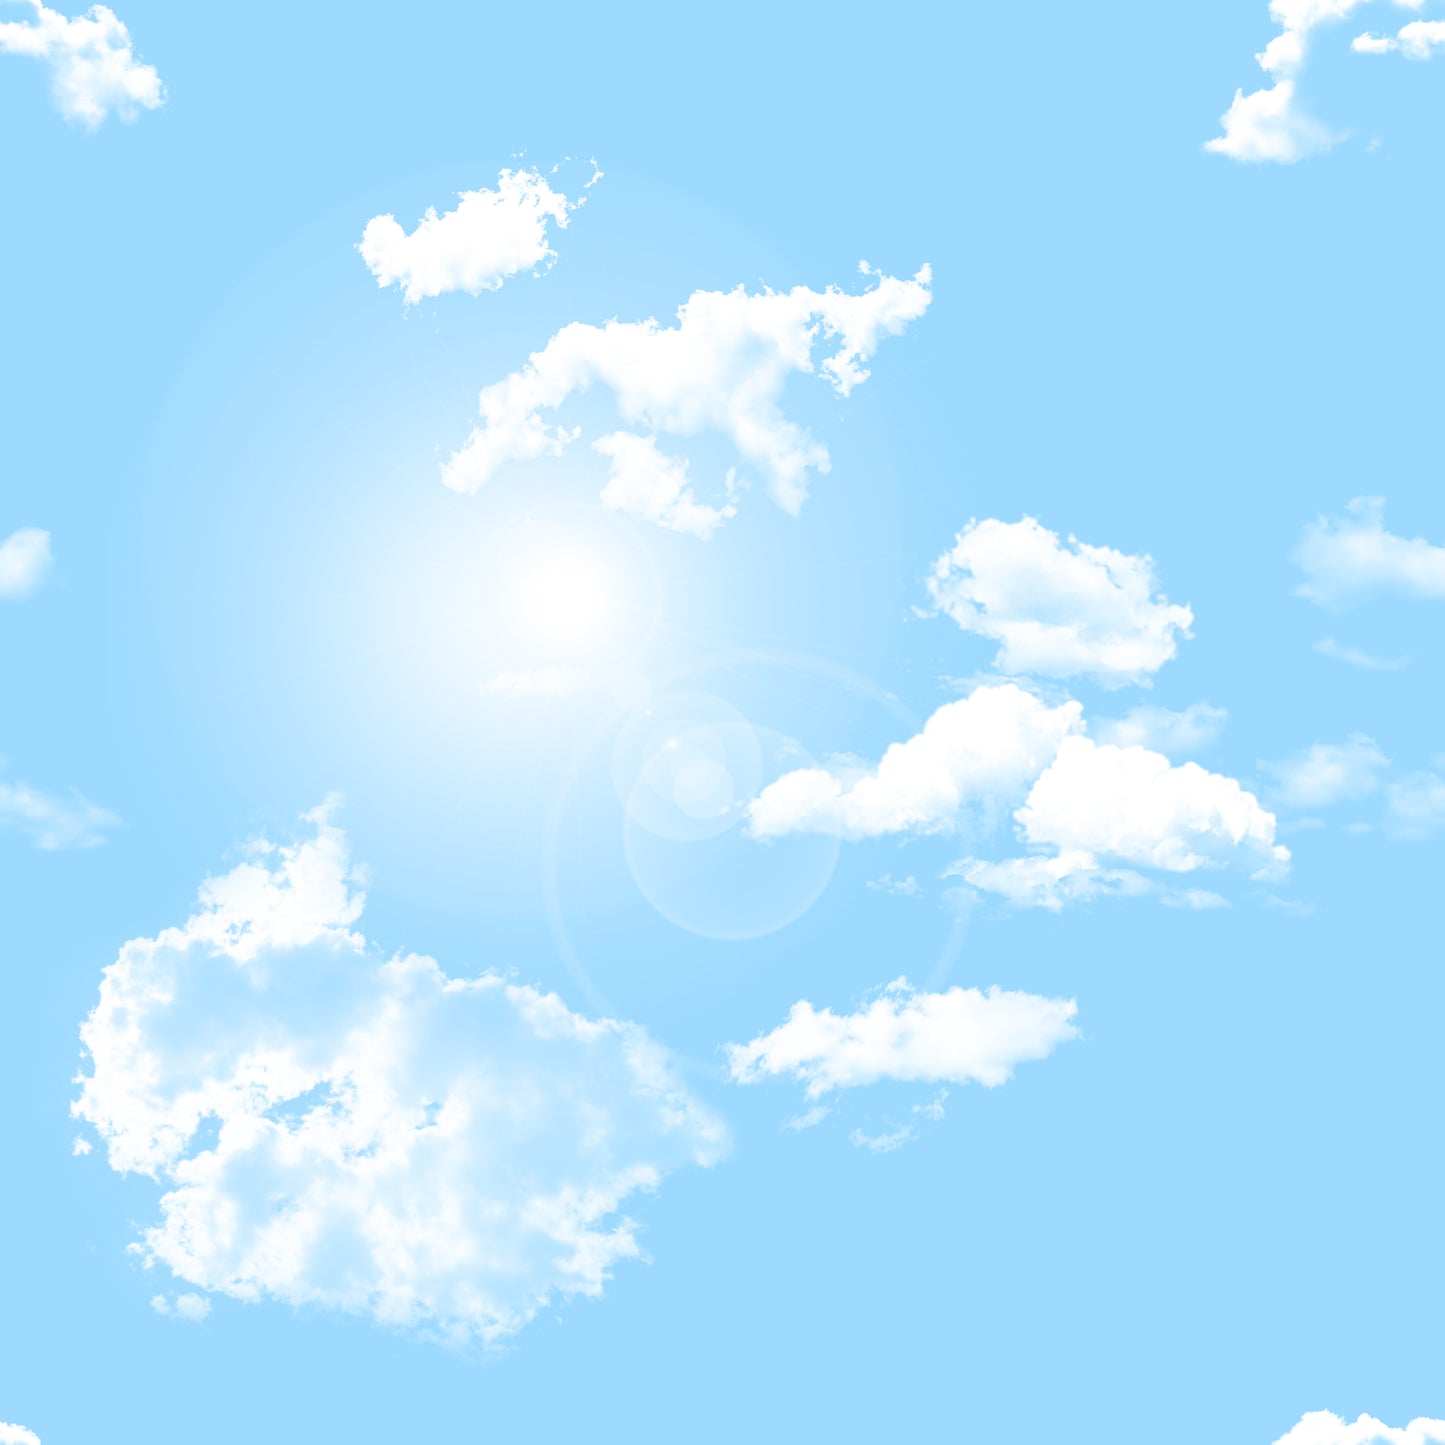 Summer Skies - Blue Sky and Clouds 012